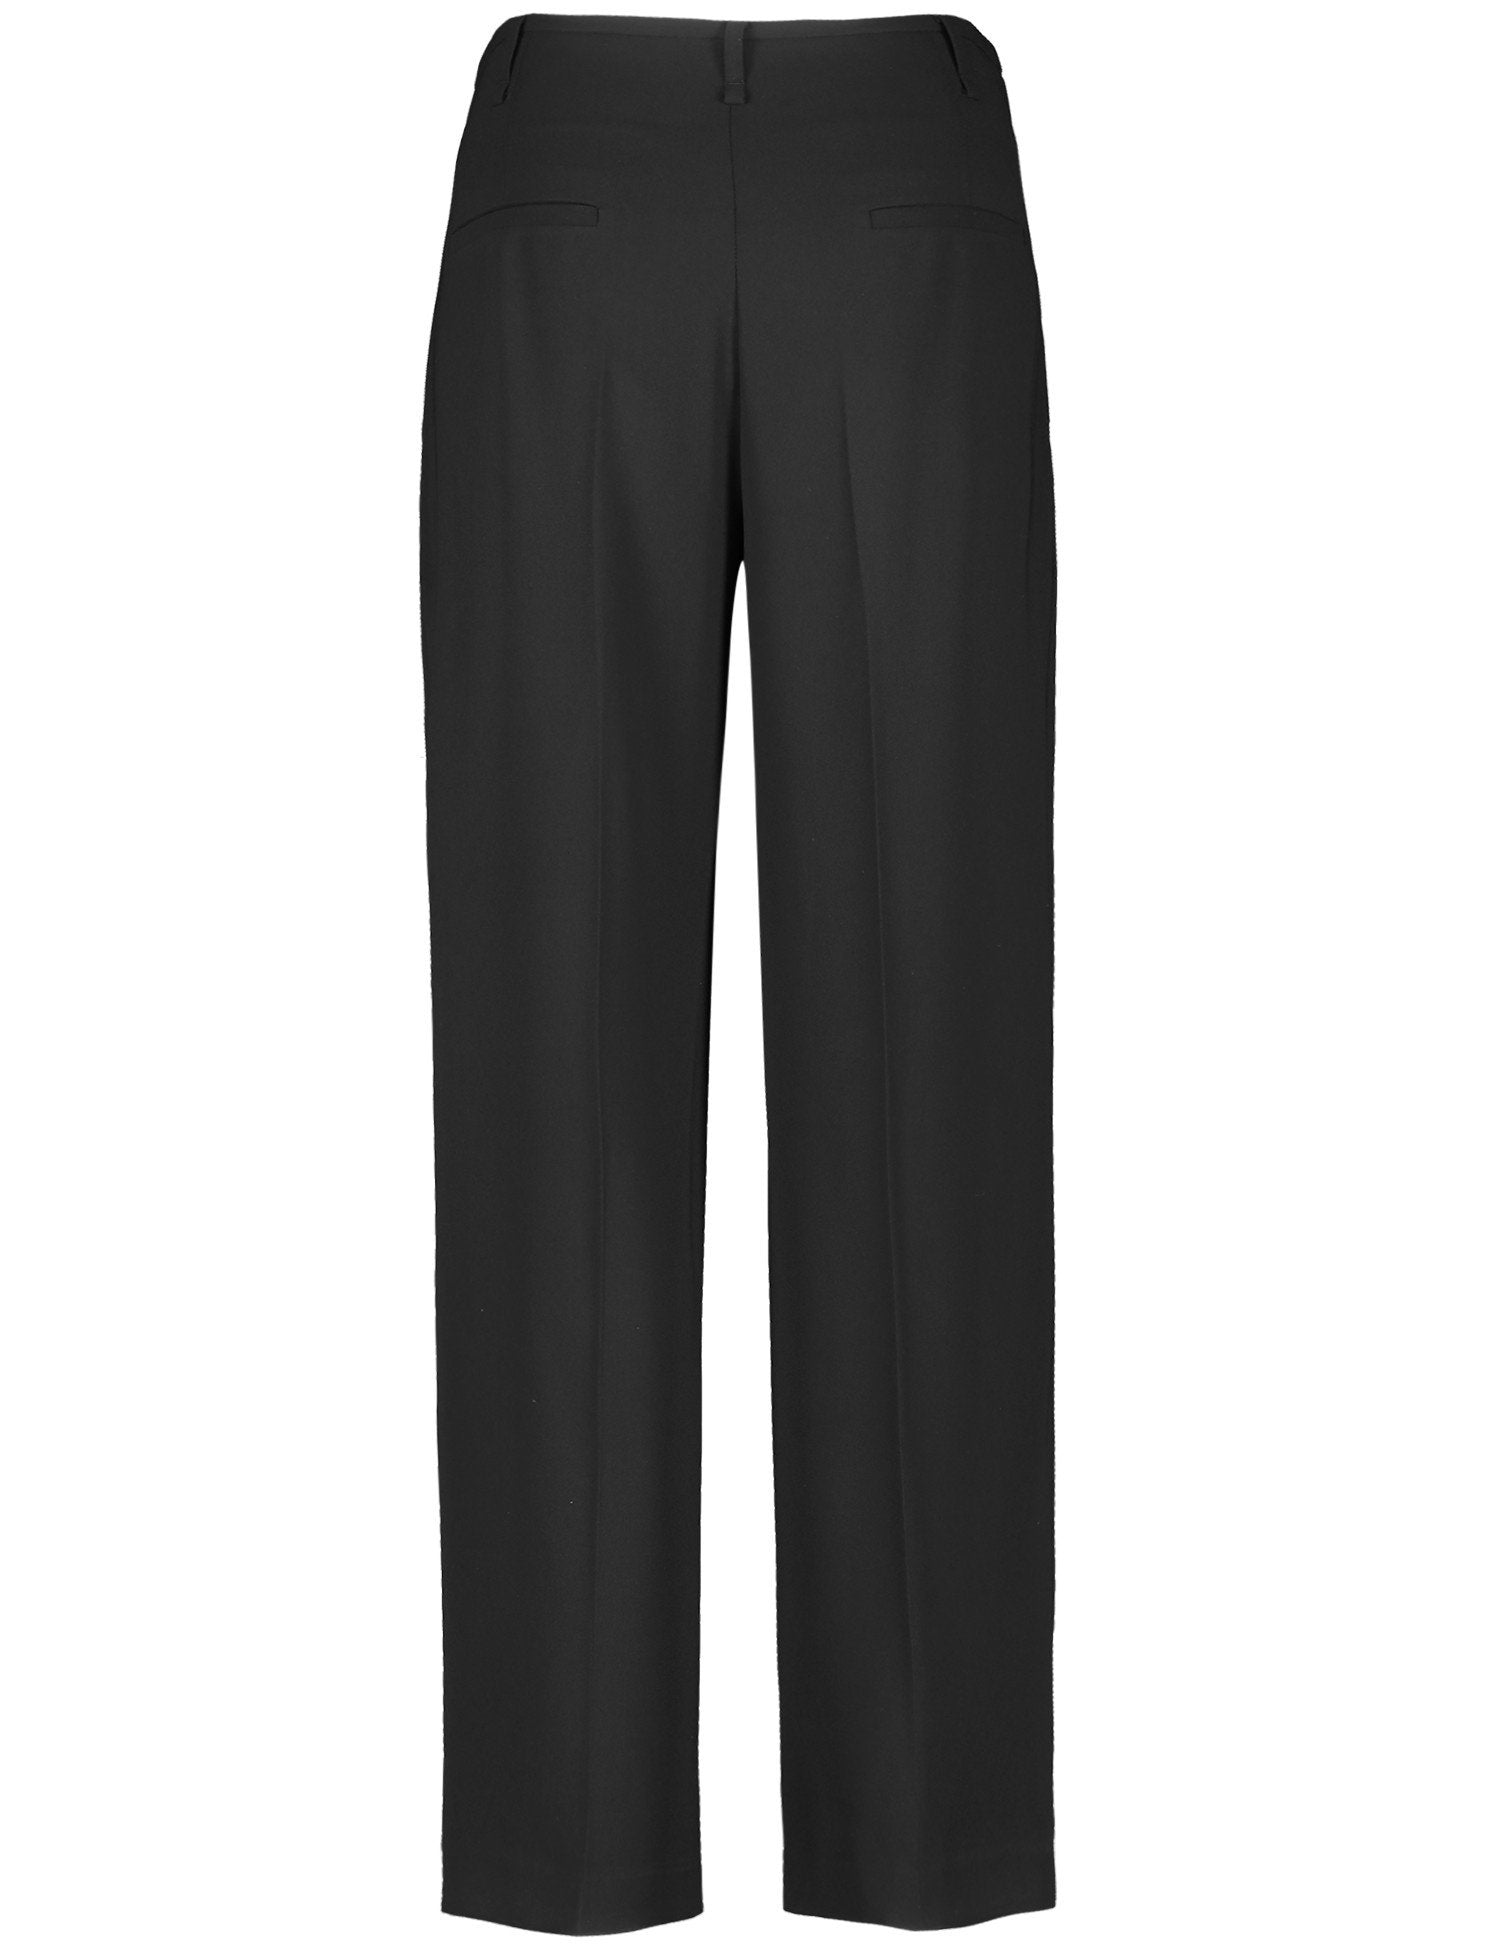 Flowing Trousers With Waist Pleats And A Wide Leg_220045-71944_11000_03